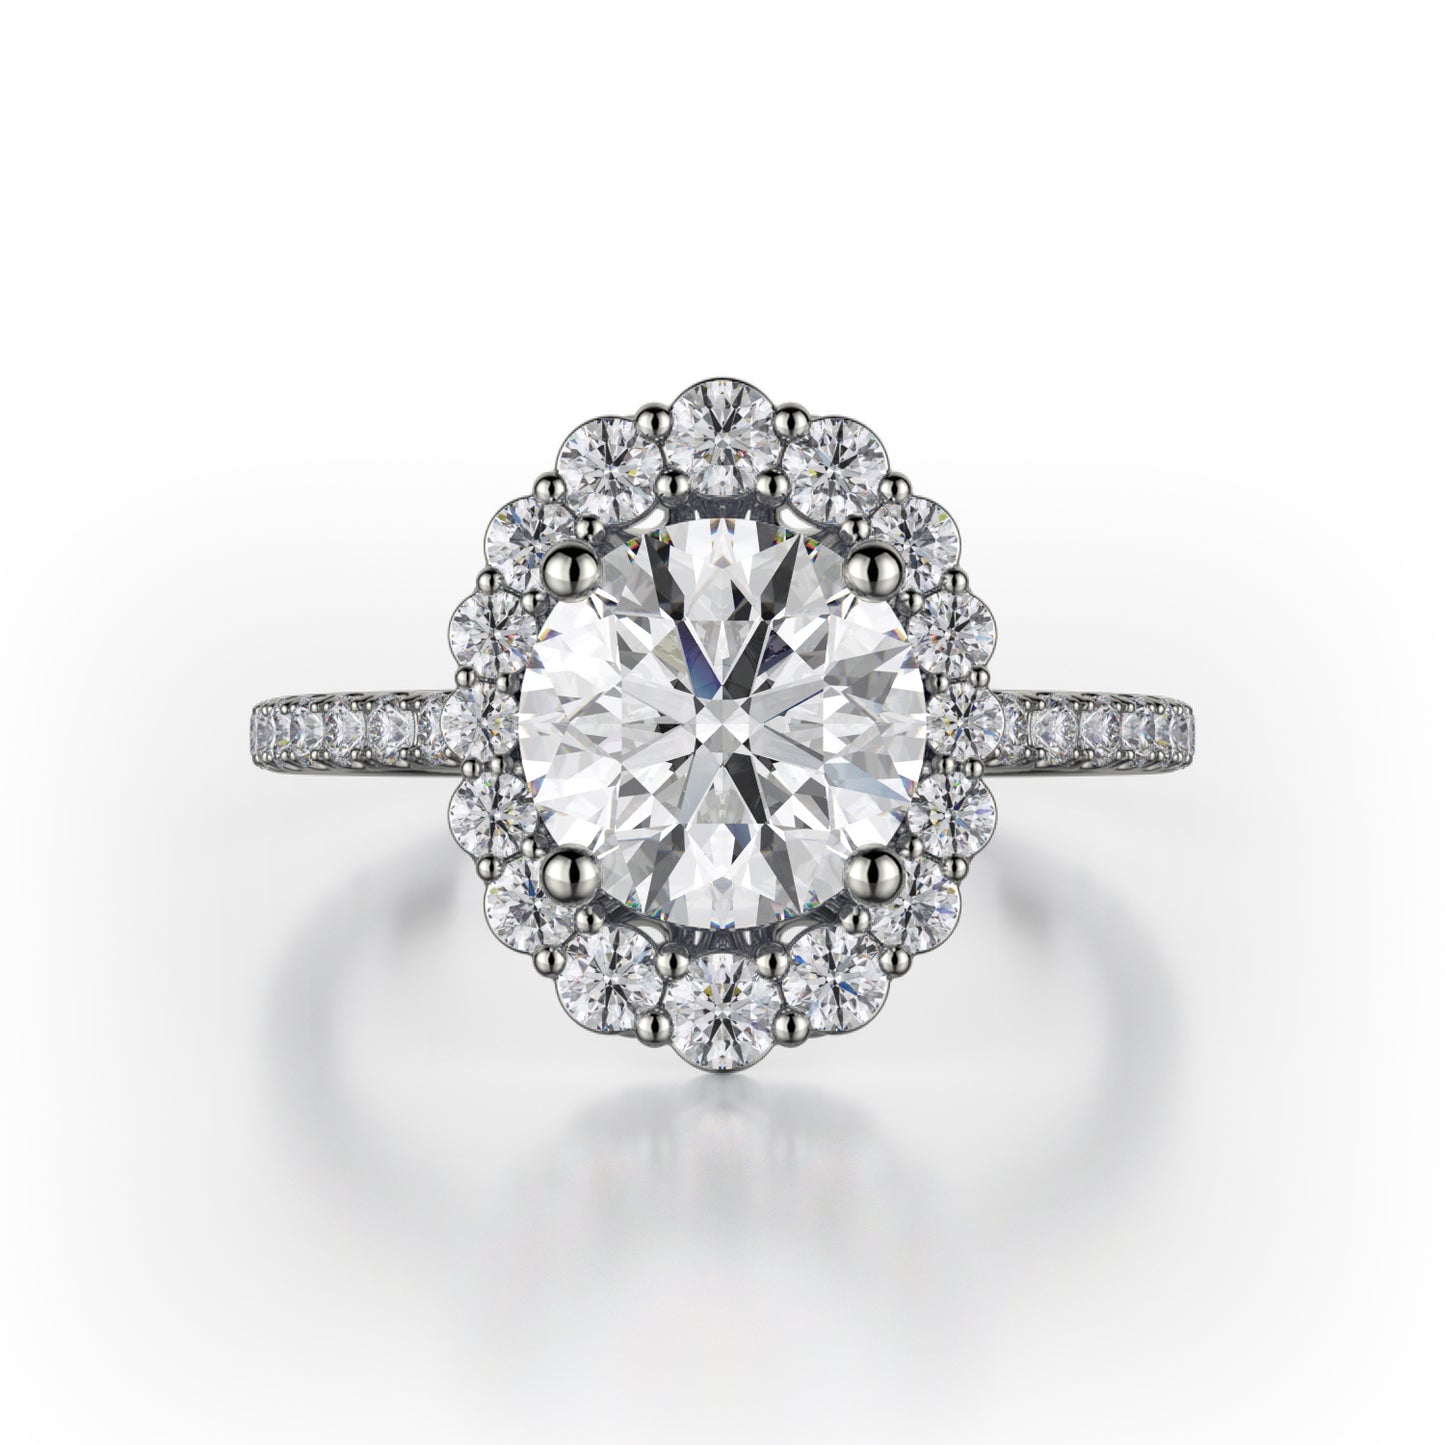 Michael M Defined Engagement Ring